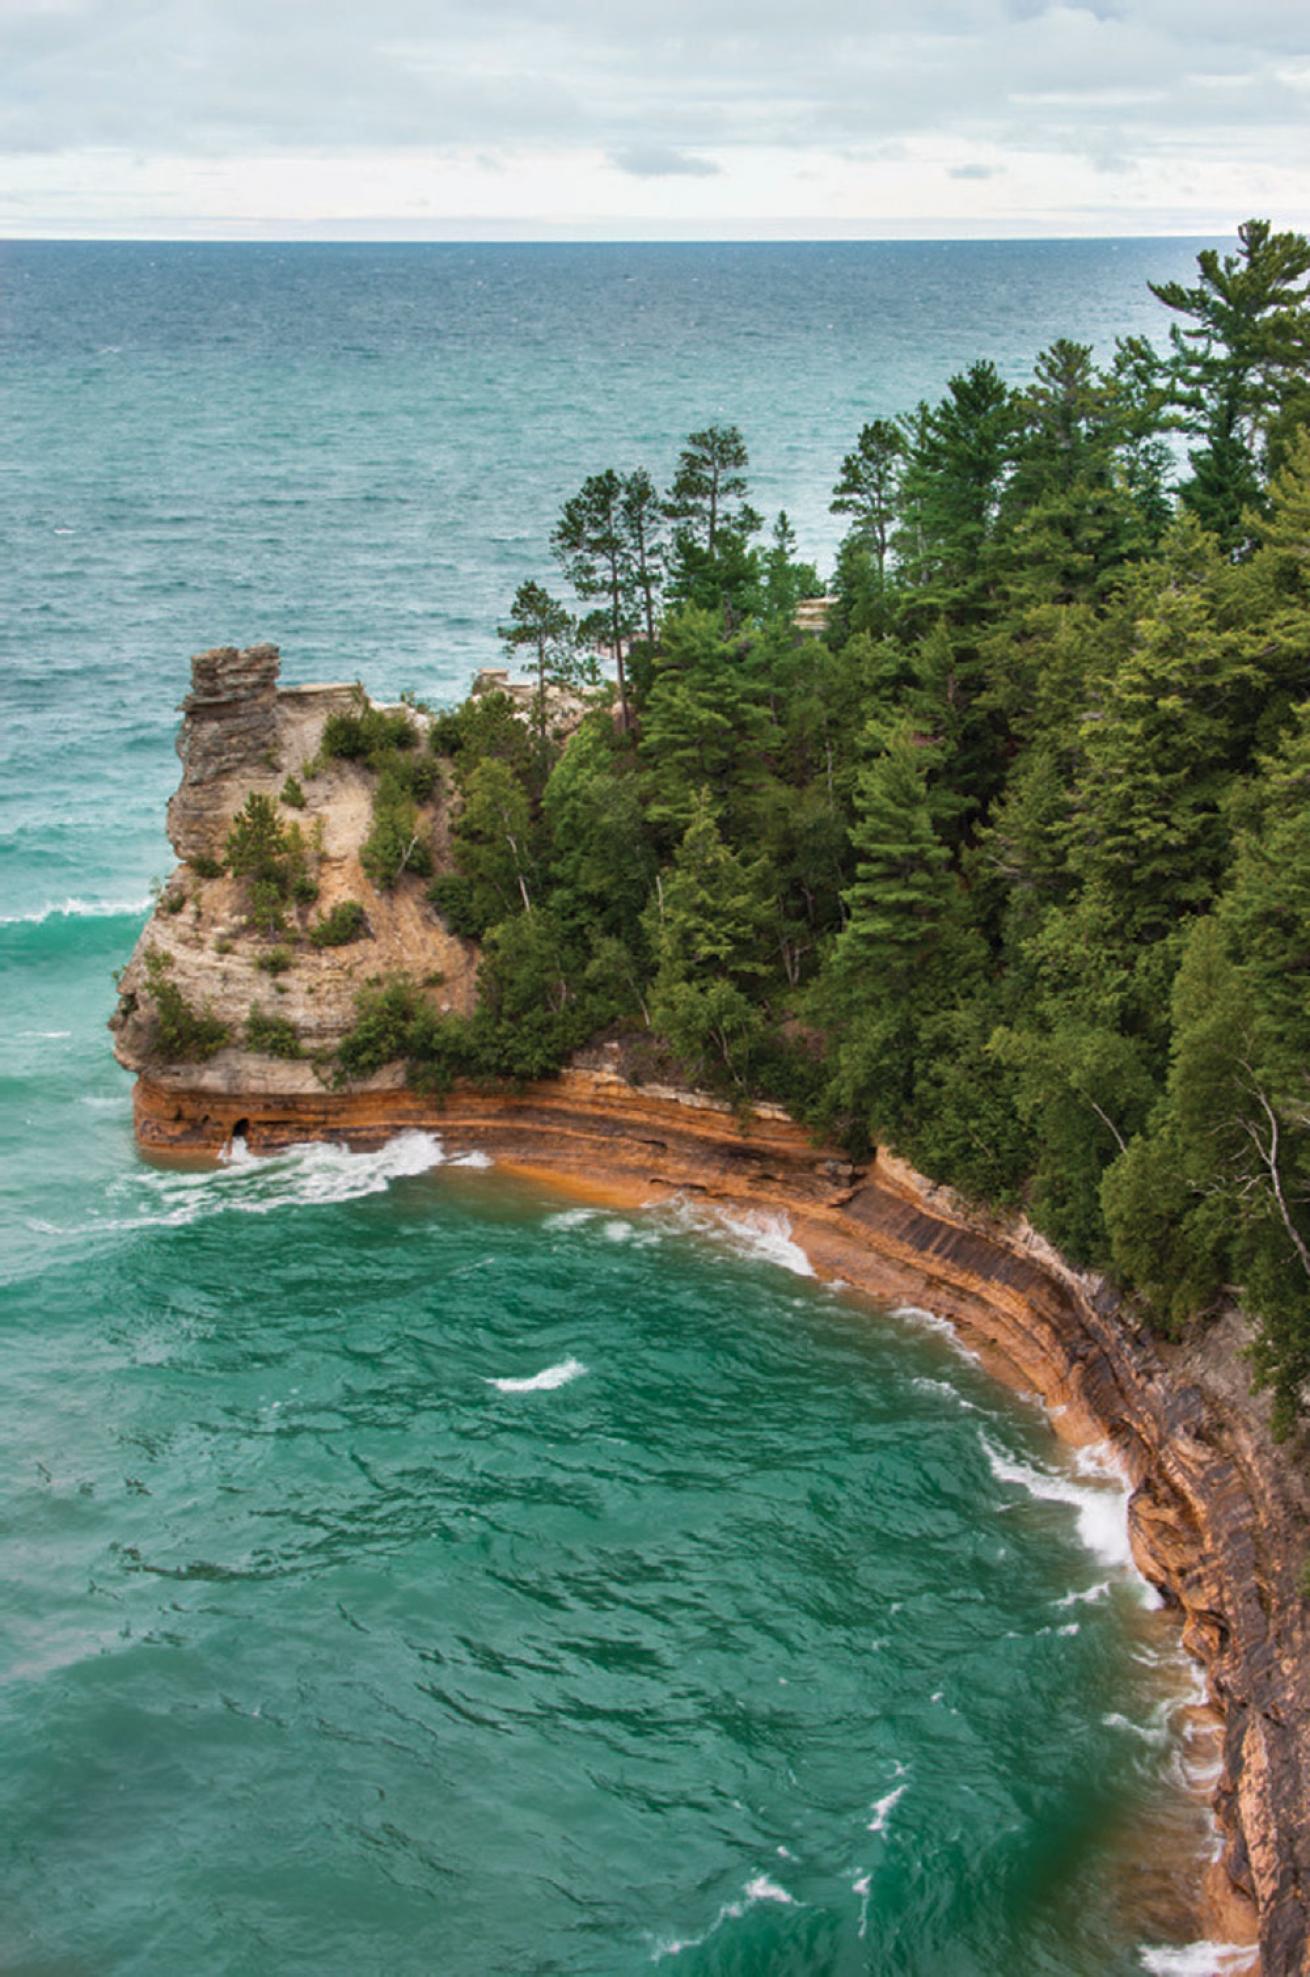 Miner's Castle at Pictured Rocks National Lakeshore